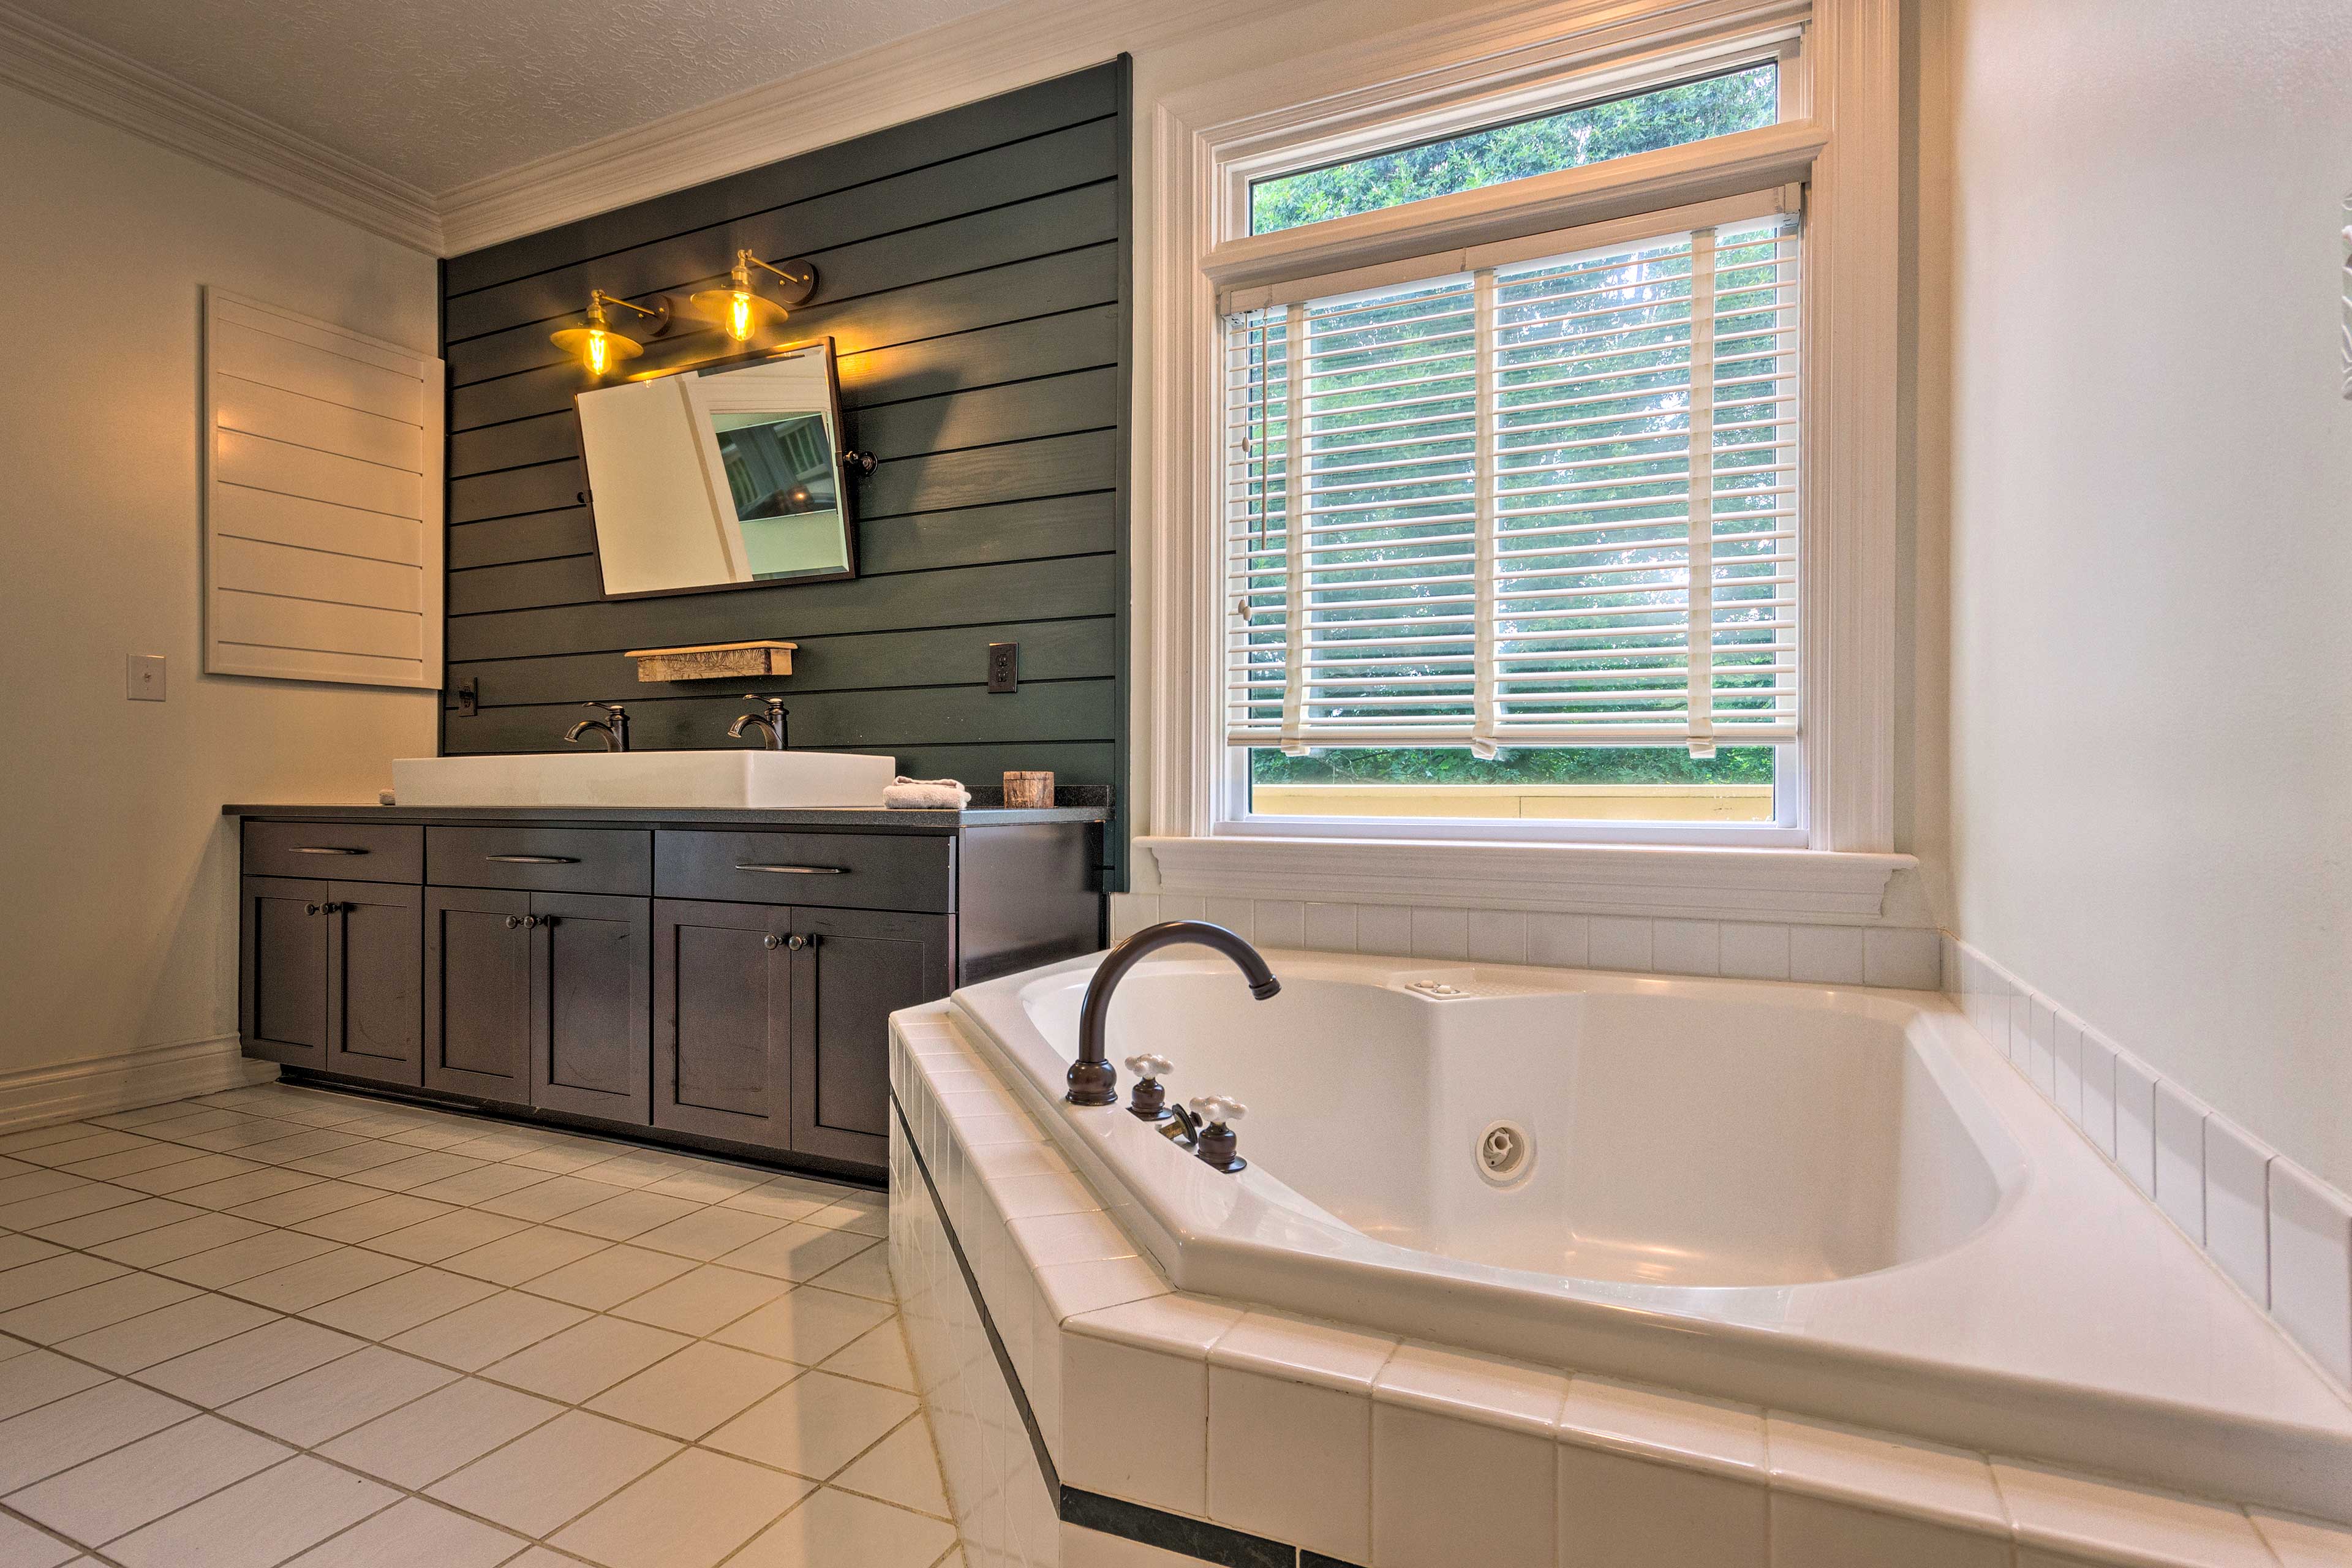 This full bathroom has relaxation written all over it with a jetted tub.